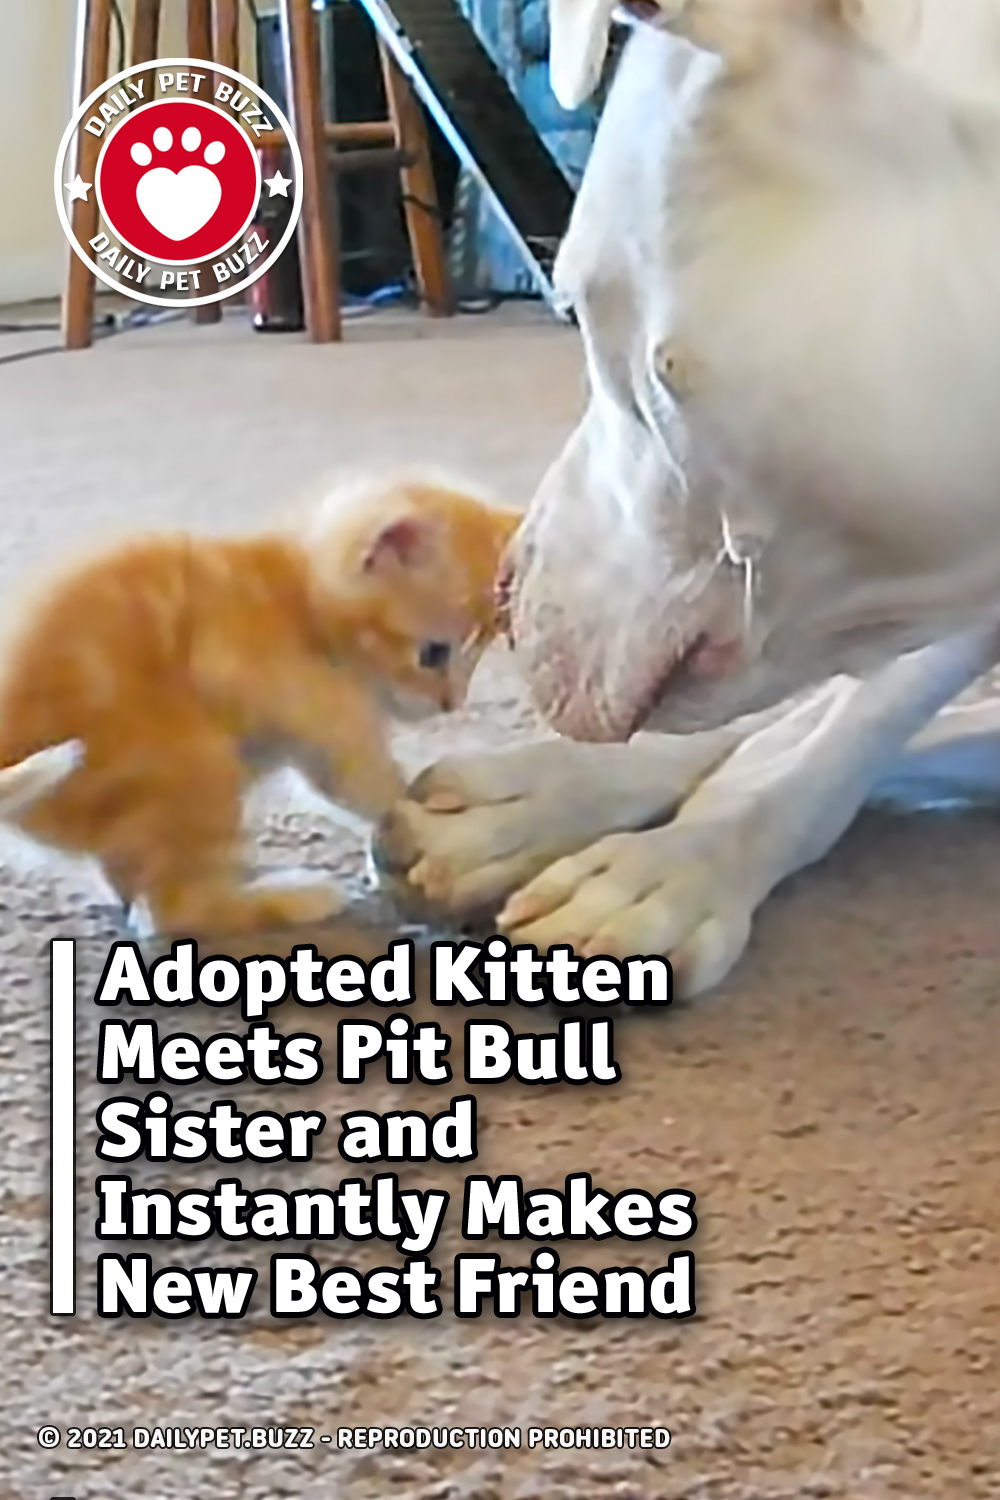 Adopted Kitten Meets Pit Bull Sister and Instantly Makes New Best Friend